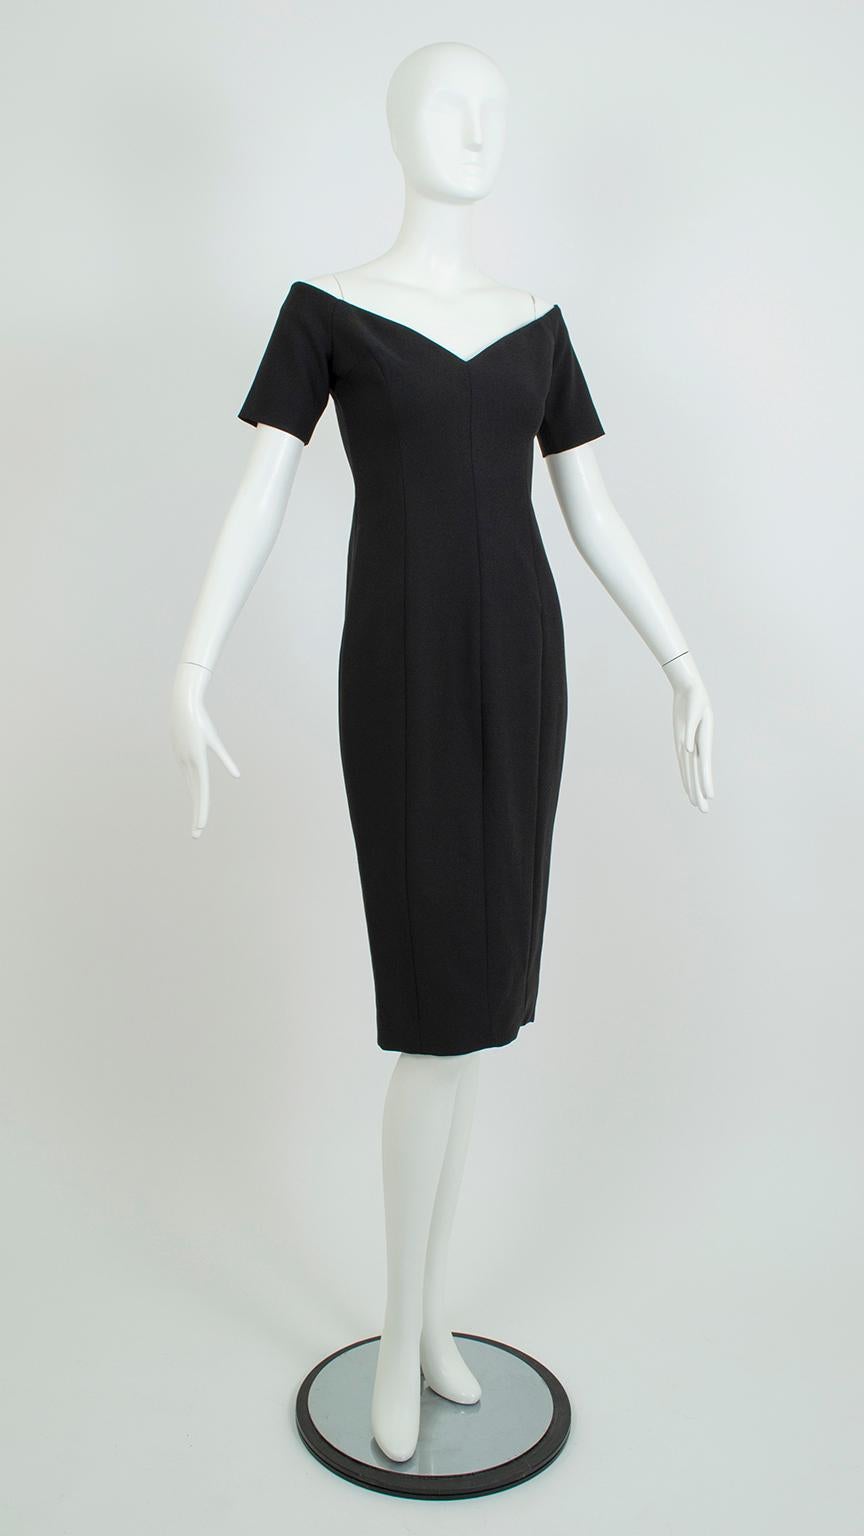 A true bombshell dress, this svelte little number remains devastatingly sexy while maintaining full modesty. A perfect facsimile of an early 60s hourglass cocktail dress, it features a wide off-shoulder portrait neckline, pulled-in waist and